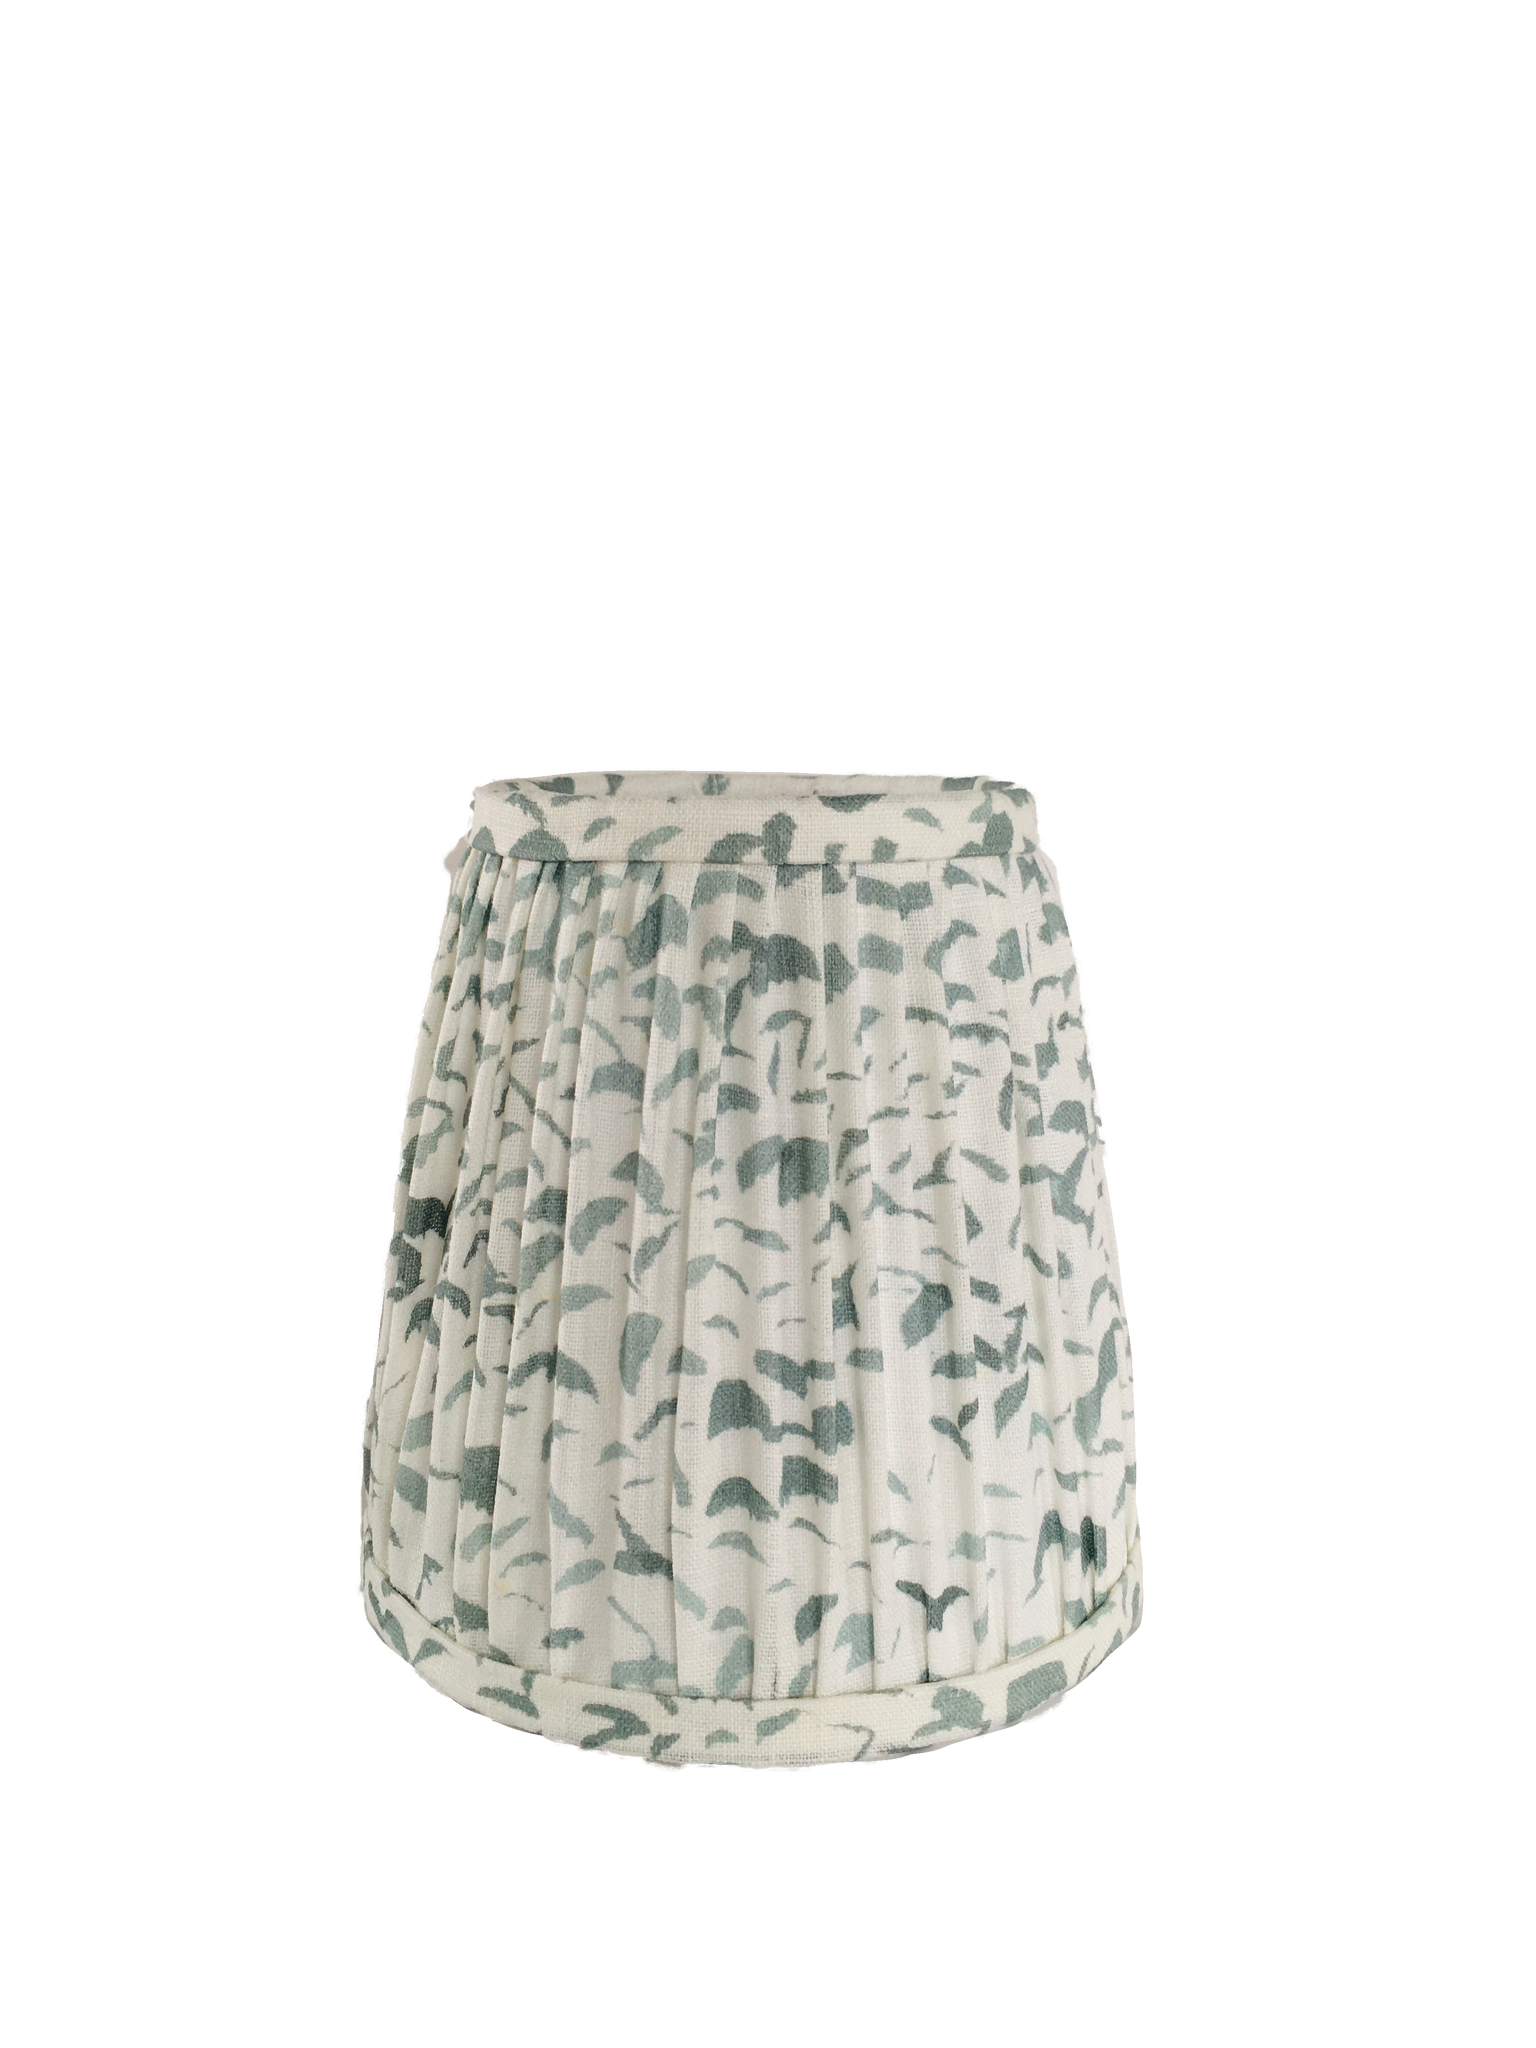 L'herbe Ciel Gathered Sconce Shade